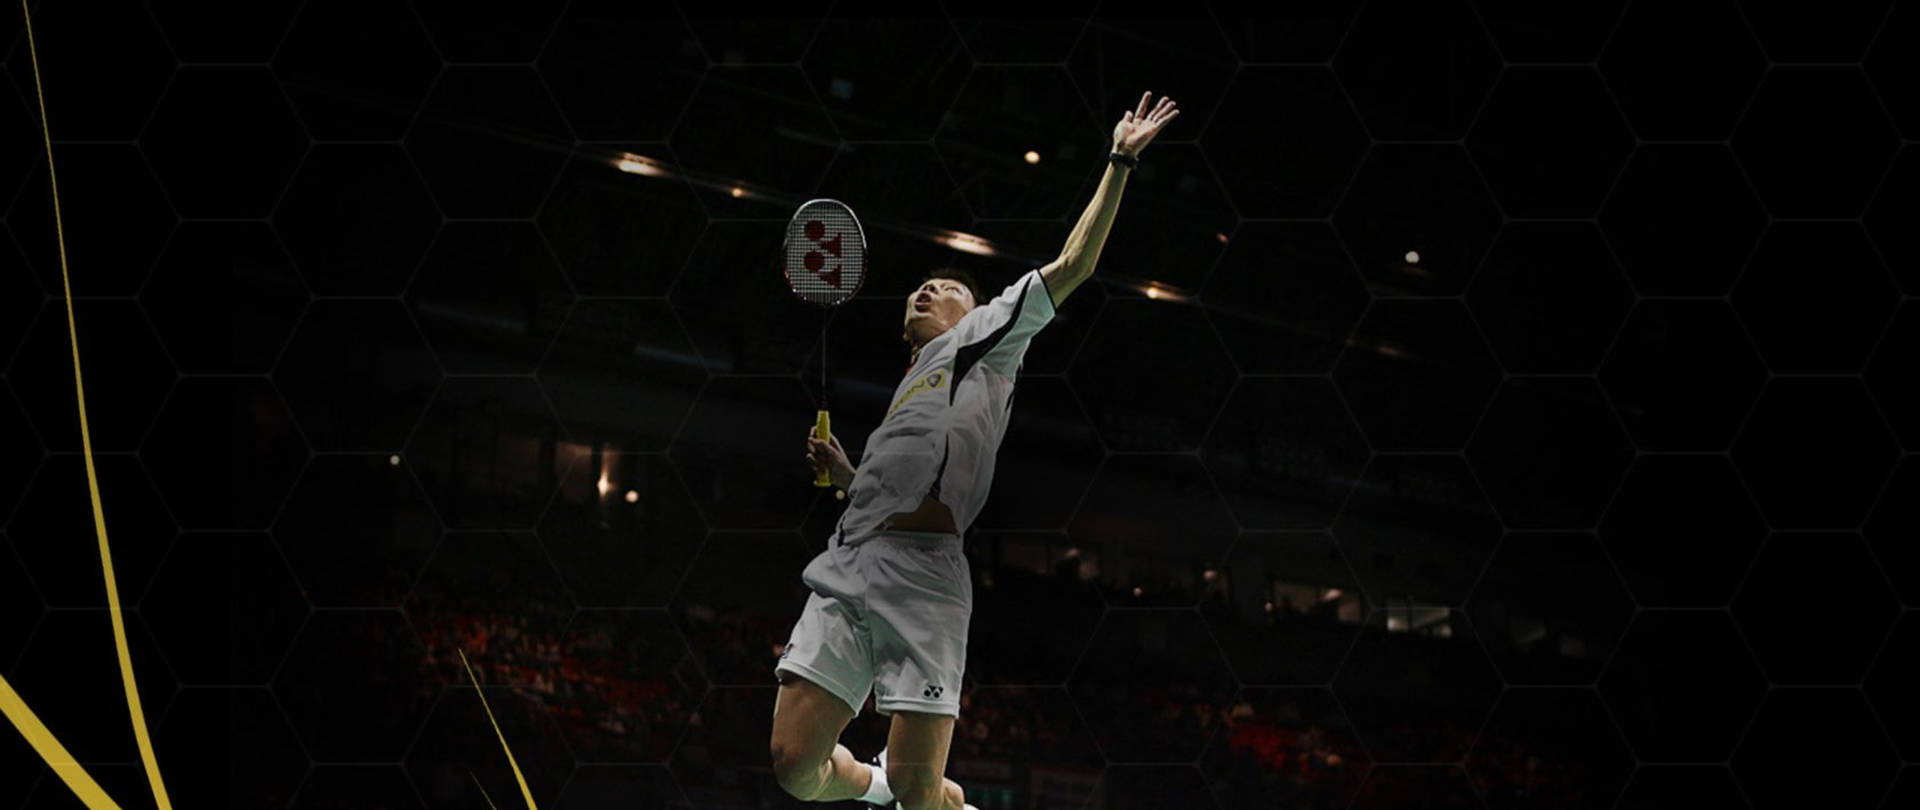 Badminton 2560X1080 Wallpaper and Background Image